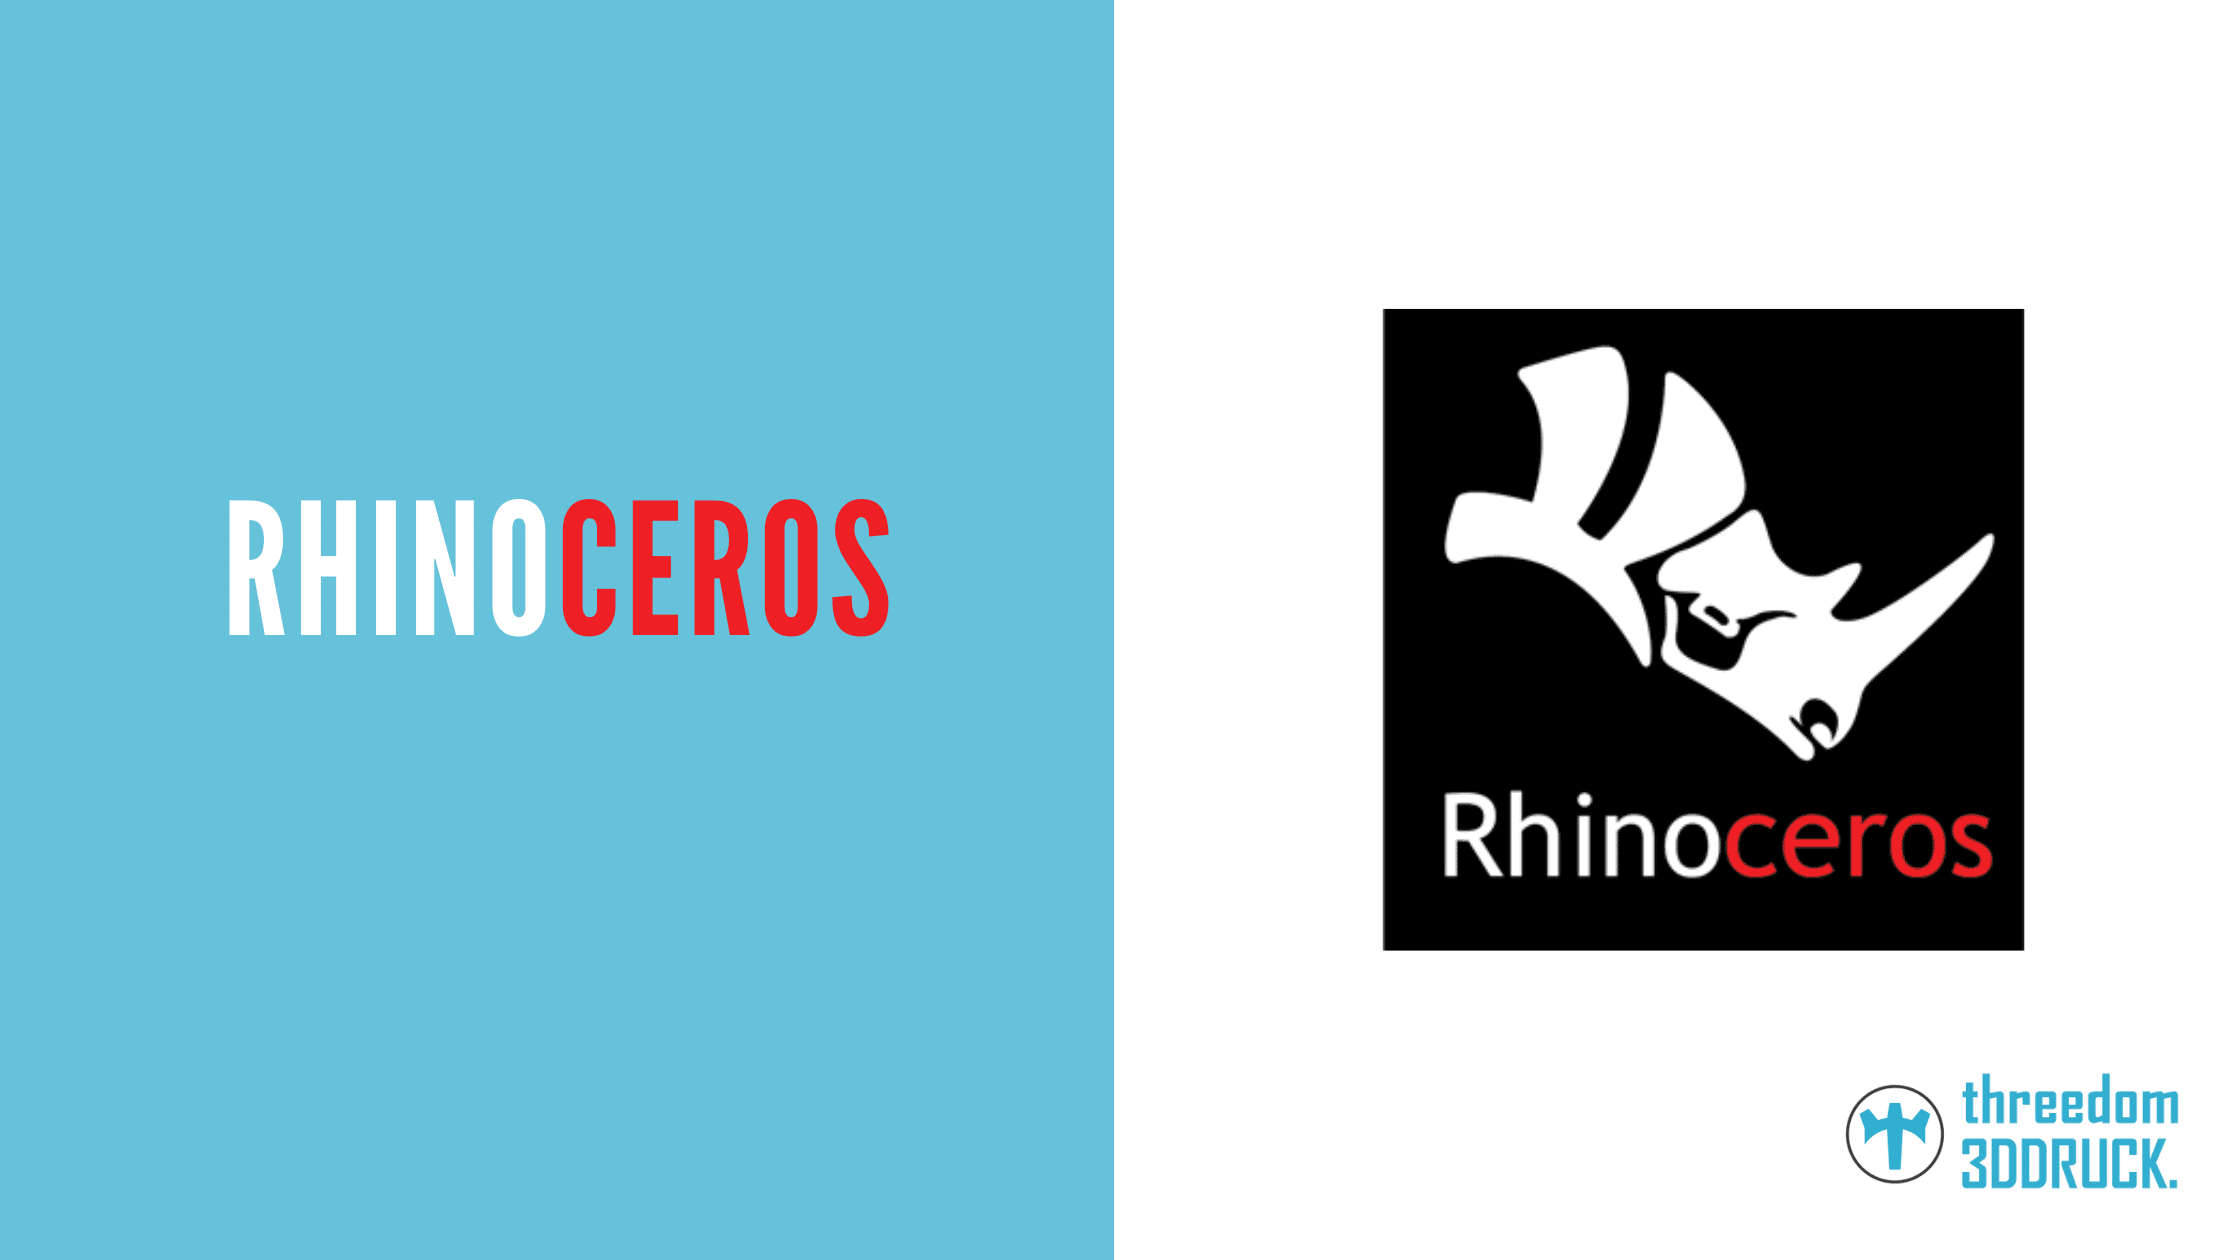 Rhino(ceros): Definition, functionality and scope